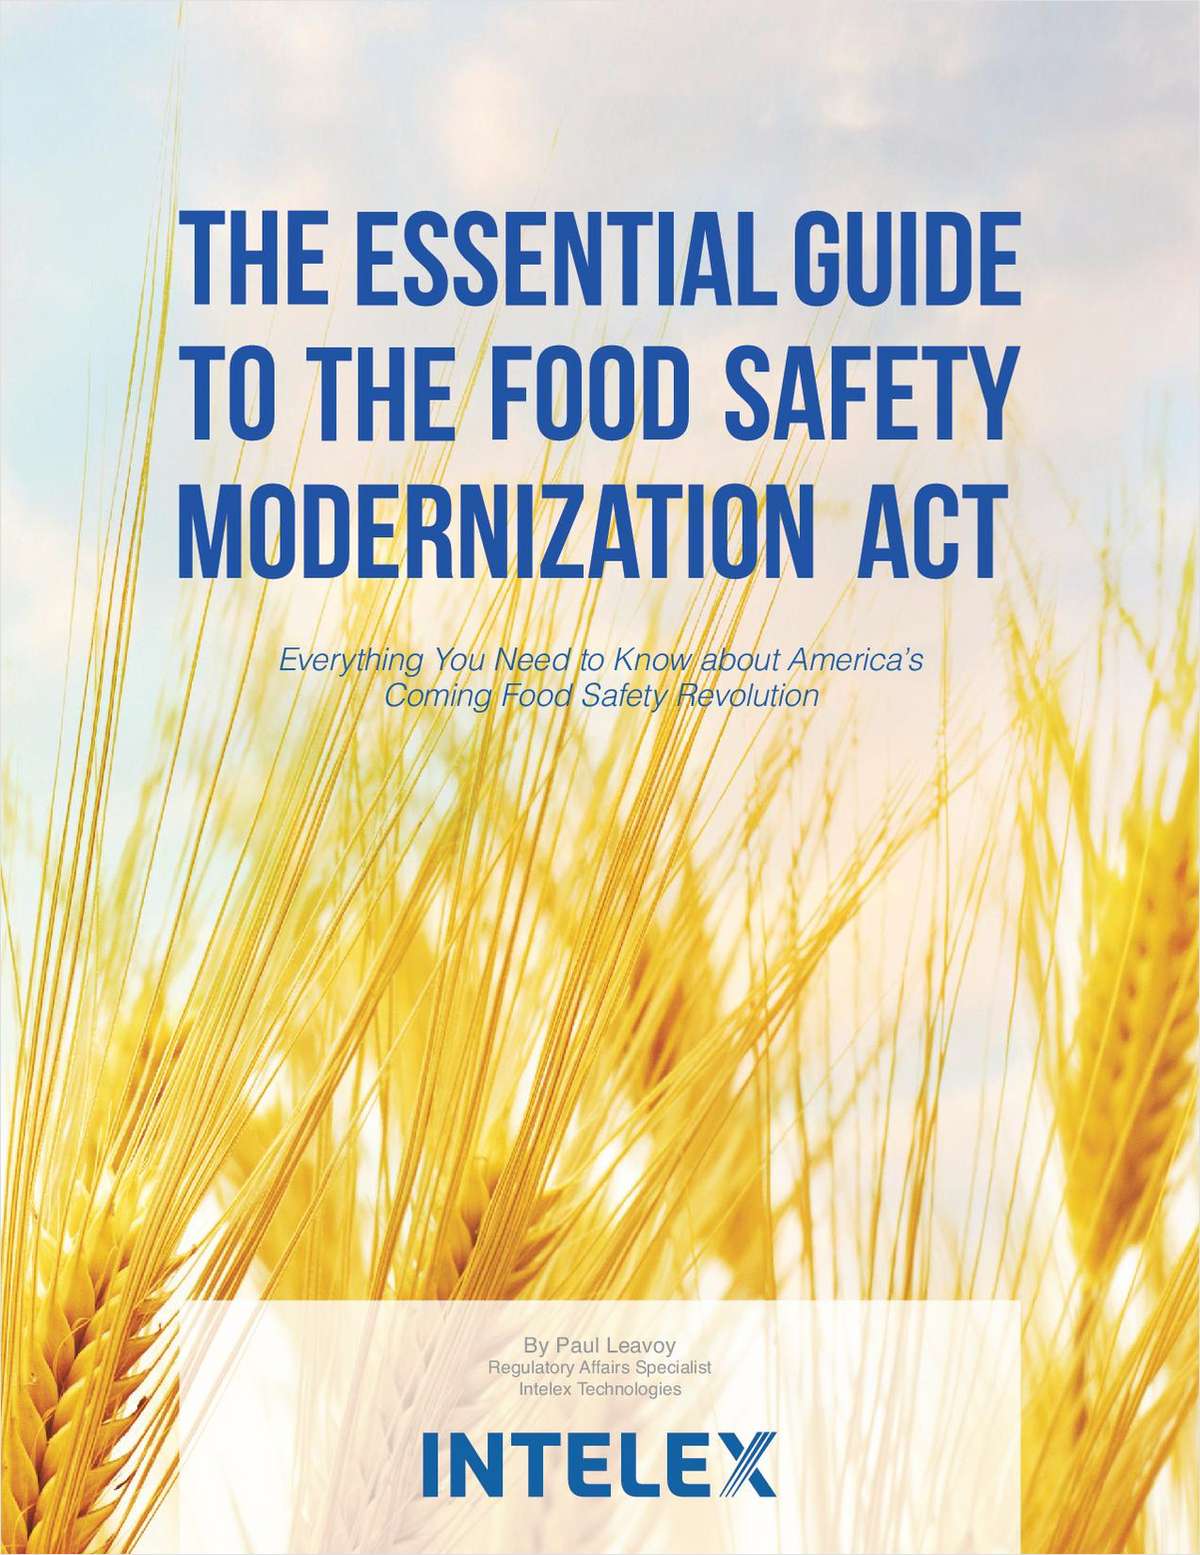 The Essential Guide to the Food Safety Modernization Act